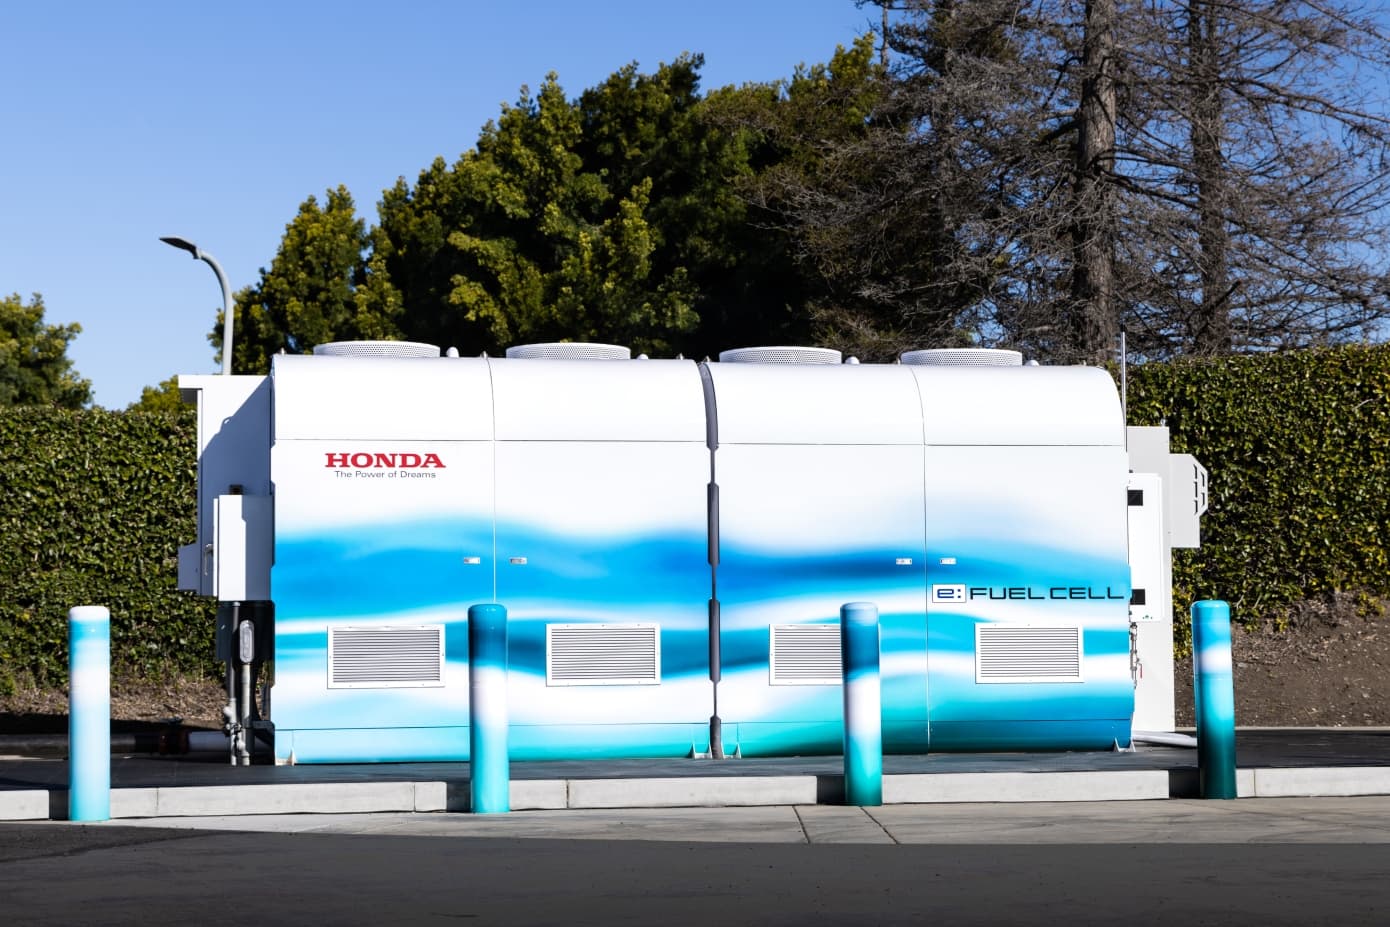 Data center breathes new life into Honda's aging hydrogen fuel cells